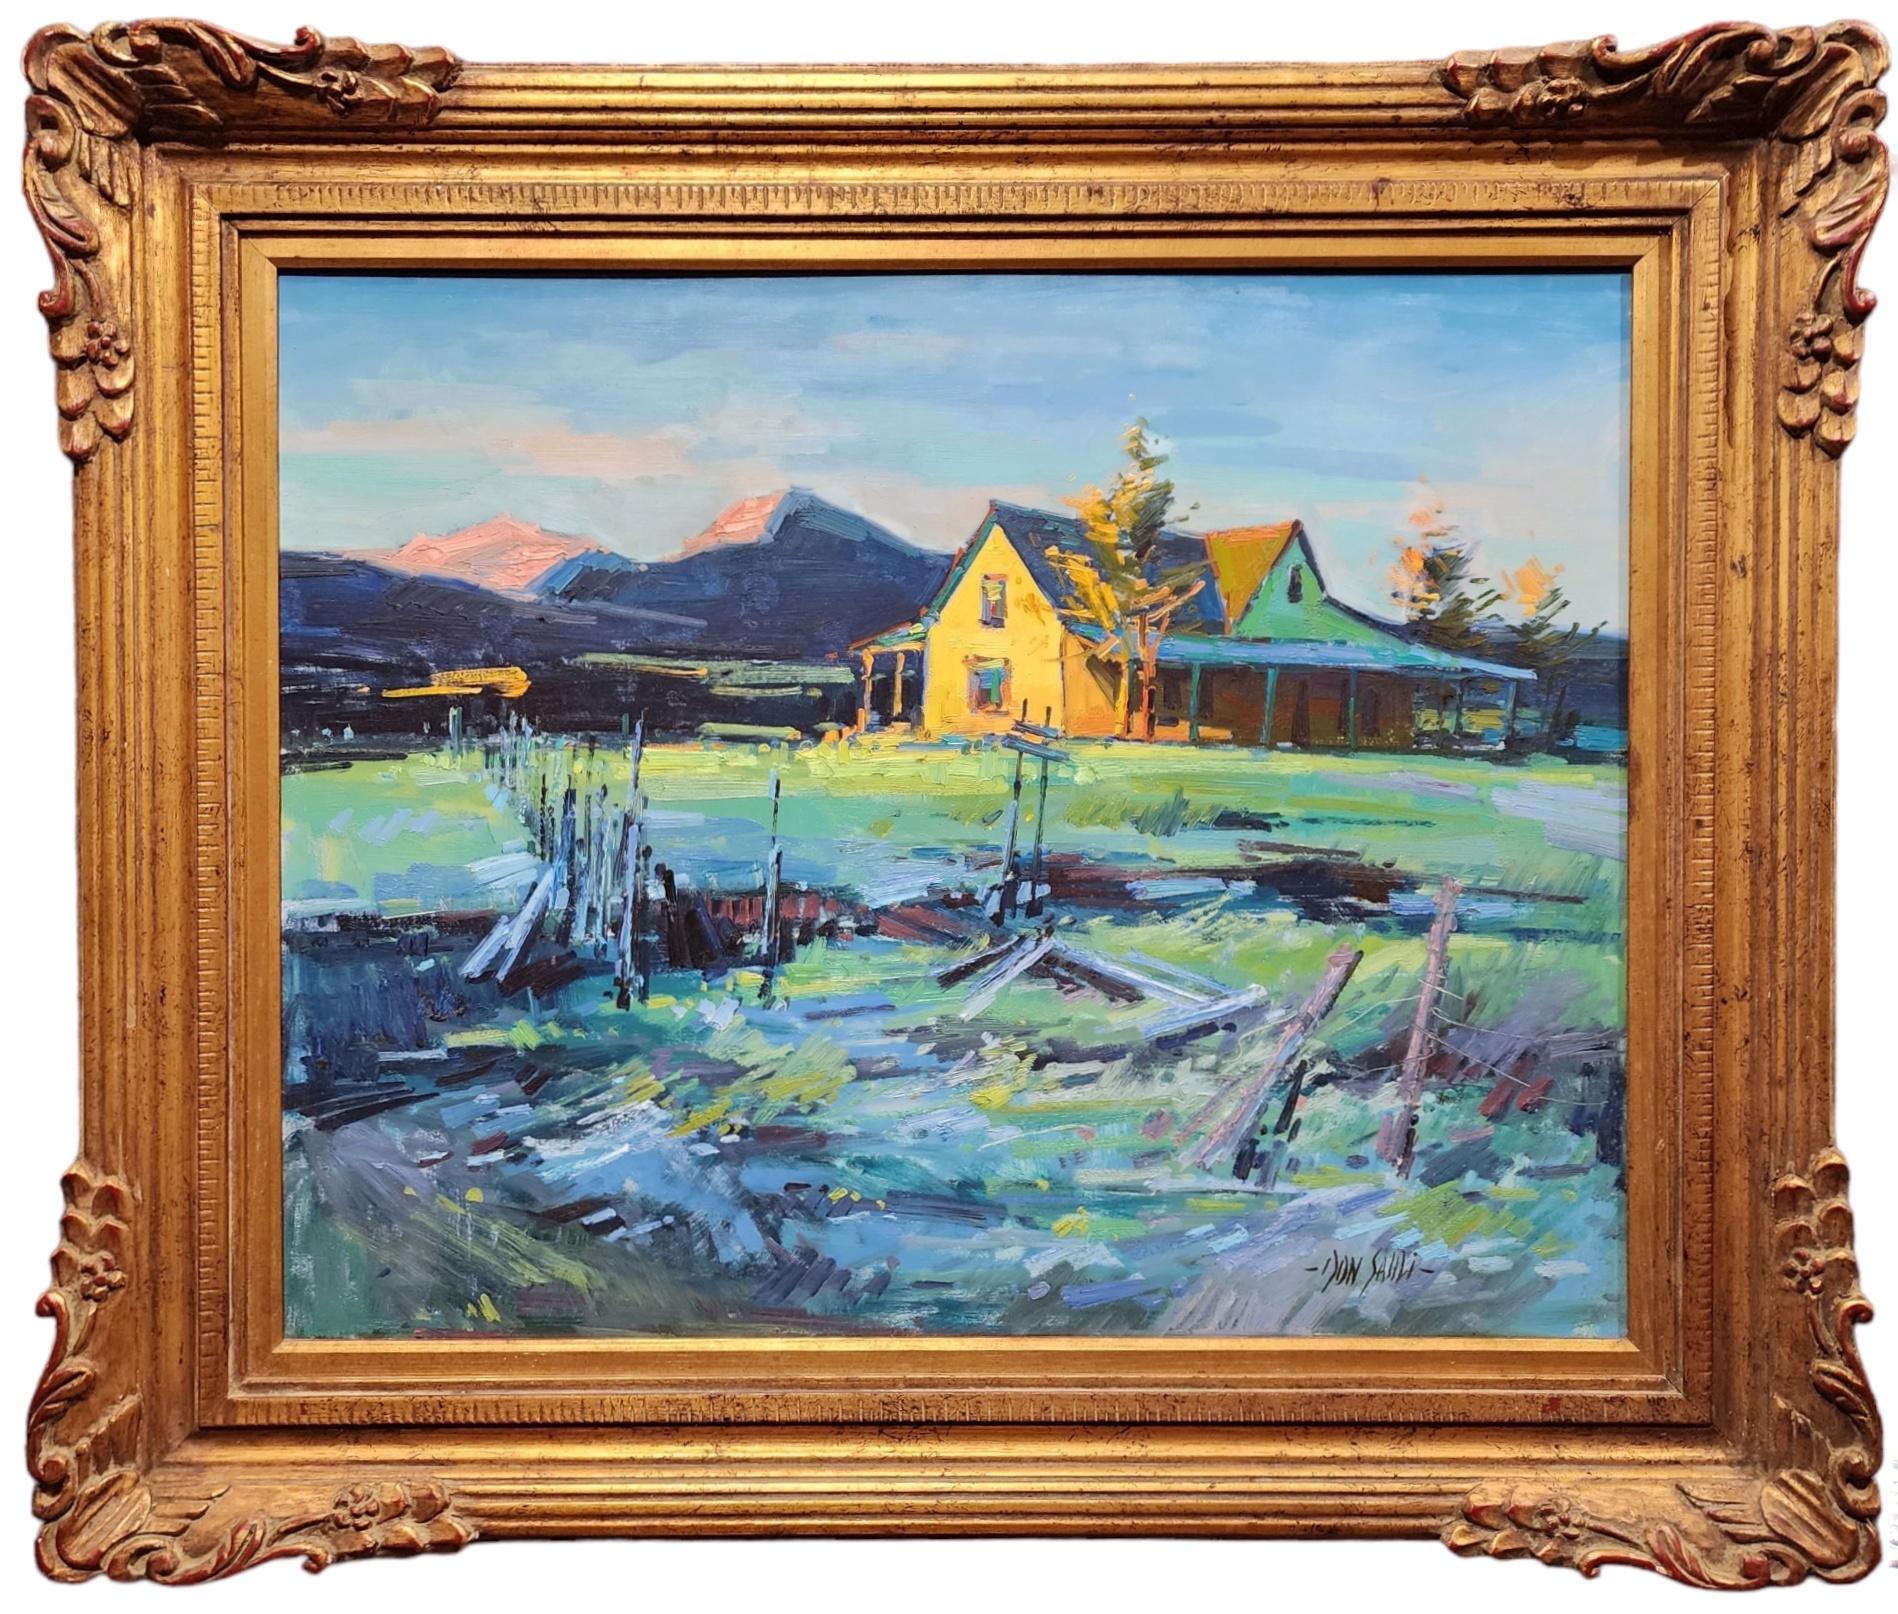 Don Sahli (American, Born 1962)

Signed: Don Sahli (Lower, Right)

" Last Light After Rain ", c. Early 1990s
(Titled on Verso)

Oil on Board

24" x 30"

Housed in a 3 3/4" carved frame with 3/4" liner

Overall Size: 32 1/2" x 38 1/4"

In overall